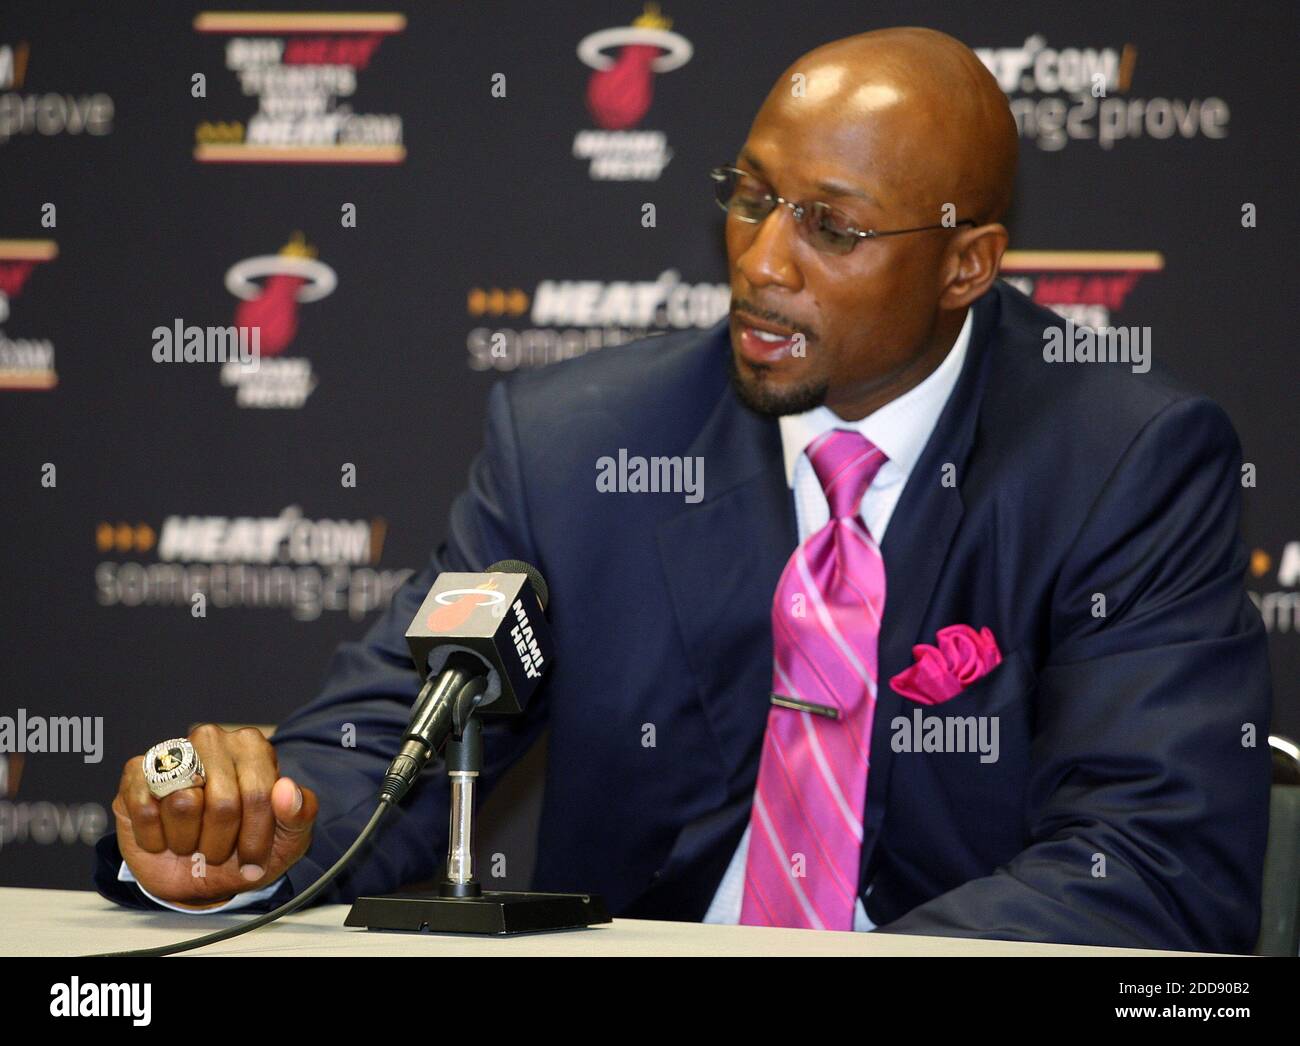 Alonzo Mourning screenshots, images and pictures - Giant Bomb